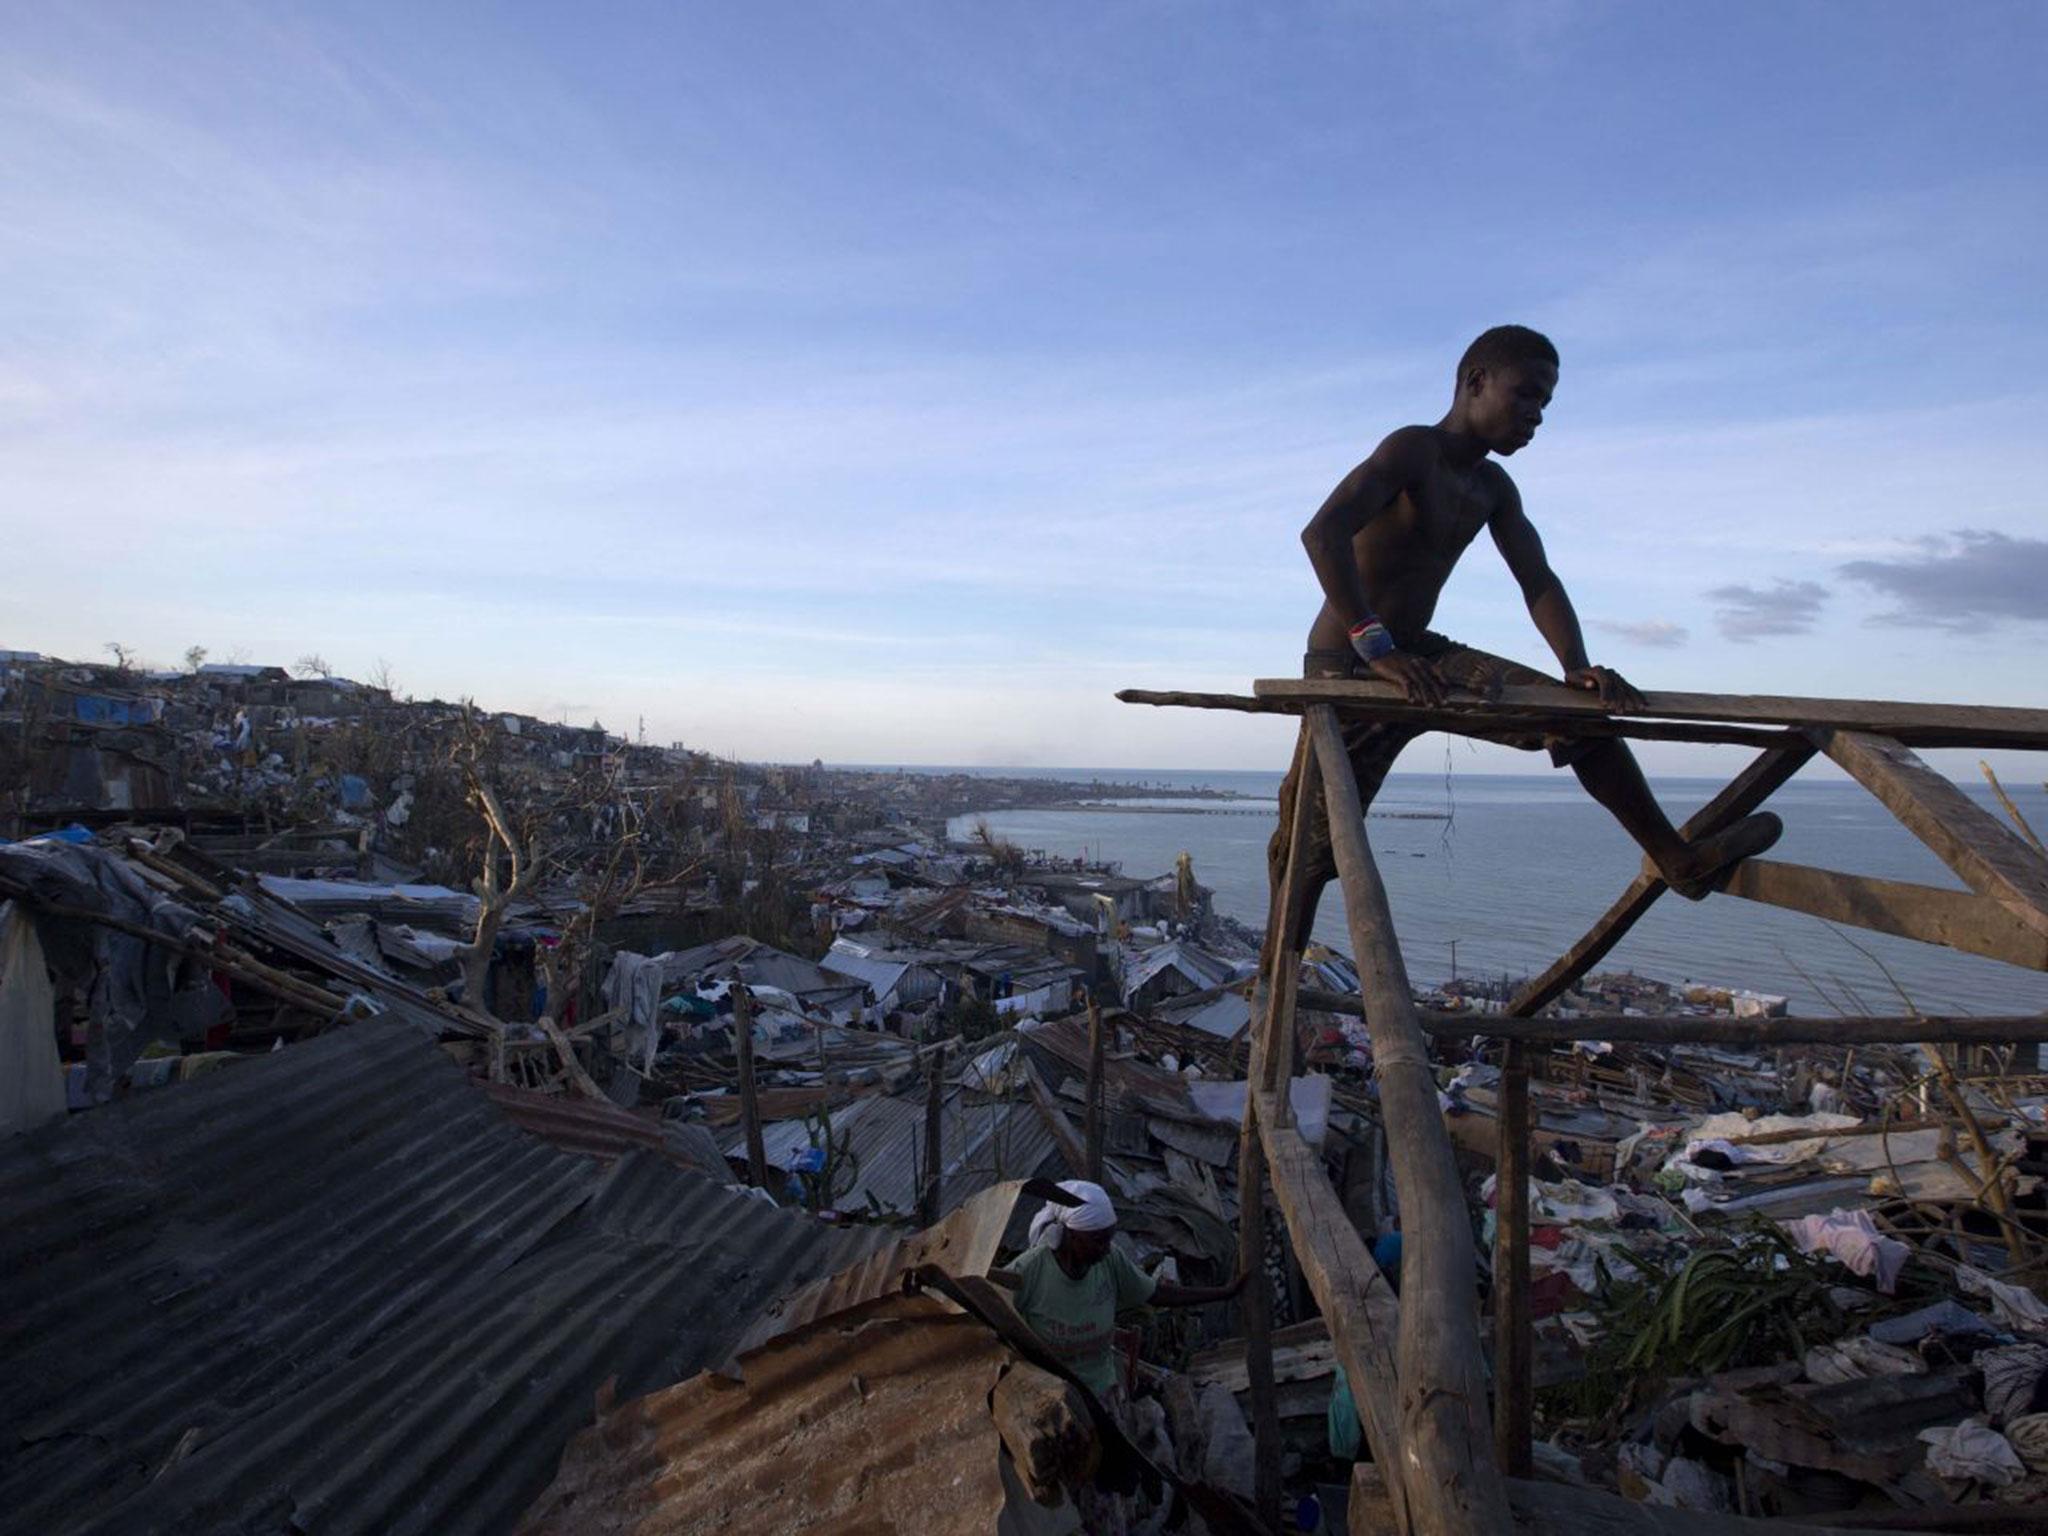 A man works to repair his roof after hurricane damage in Jeremie, Haiti